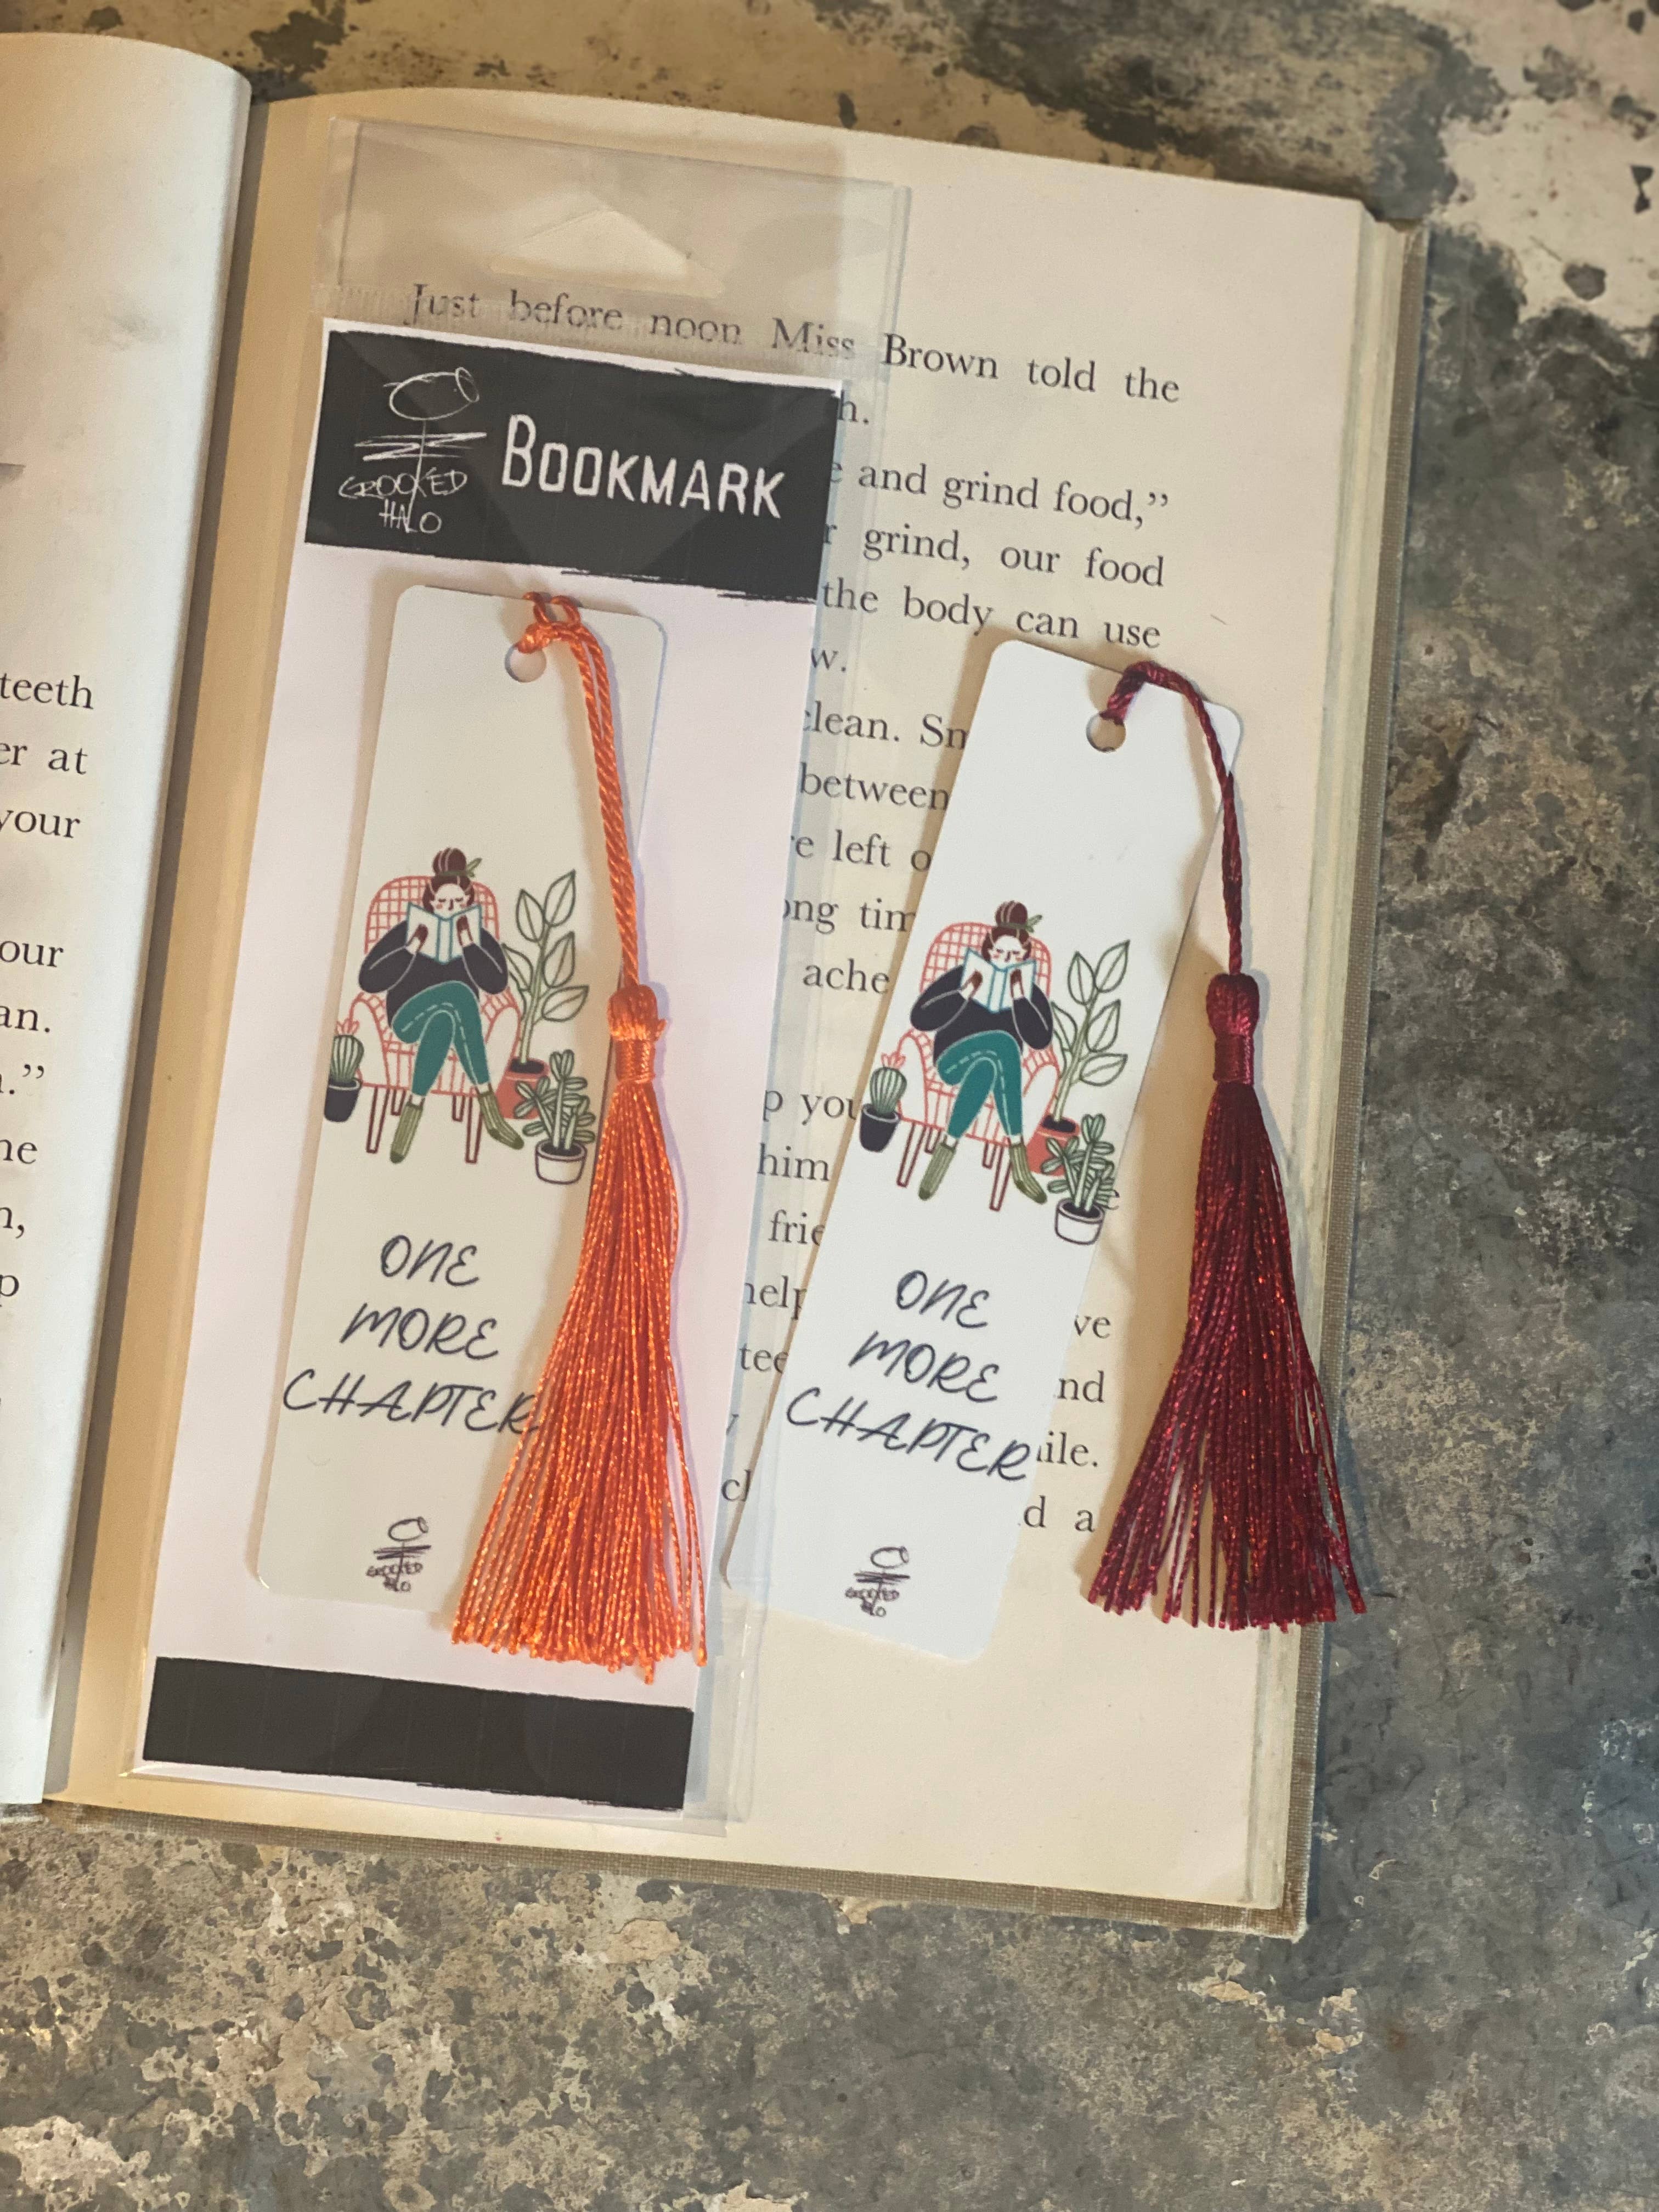 One More Chapter Metal Bookmark